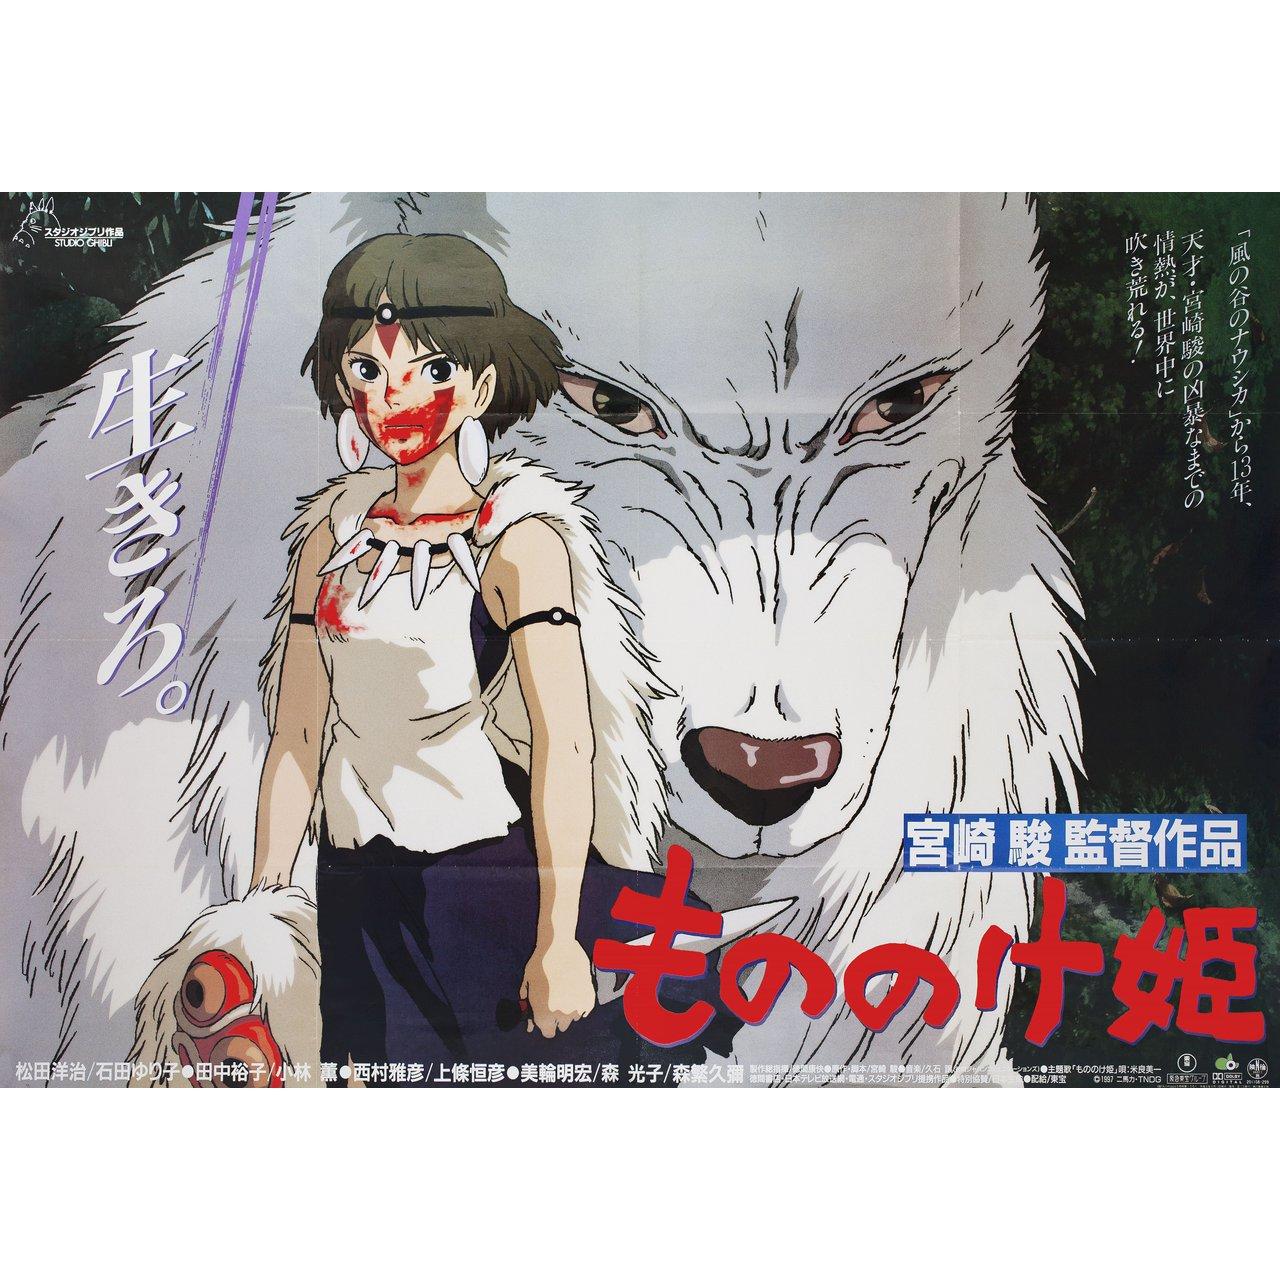 Original 1997 Japanese B1 poster for the film Princess Mononoke (Mononoke-hime) directed by Hayao Miyazaki with Billy Crudup / Billy Bob Thornton / Minnie Driver / John DiMaggio. Very Good-Fine condition, folded. Many original posters were issued